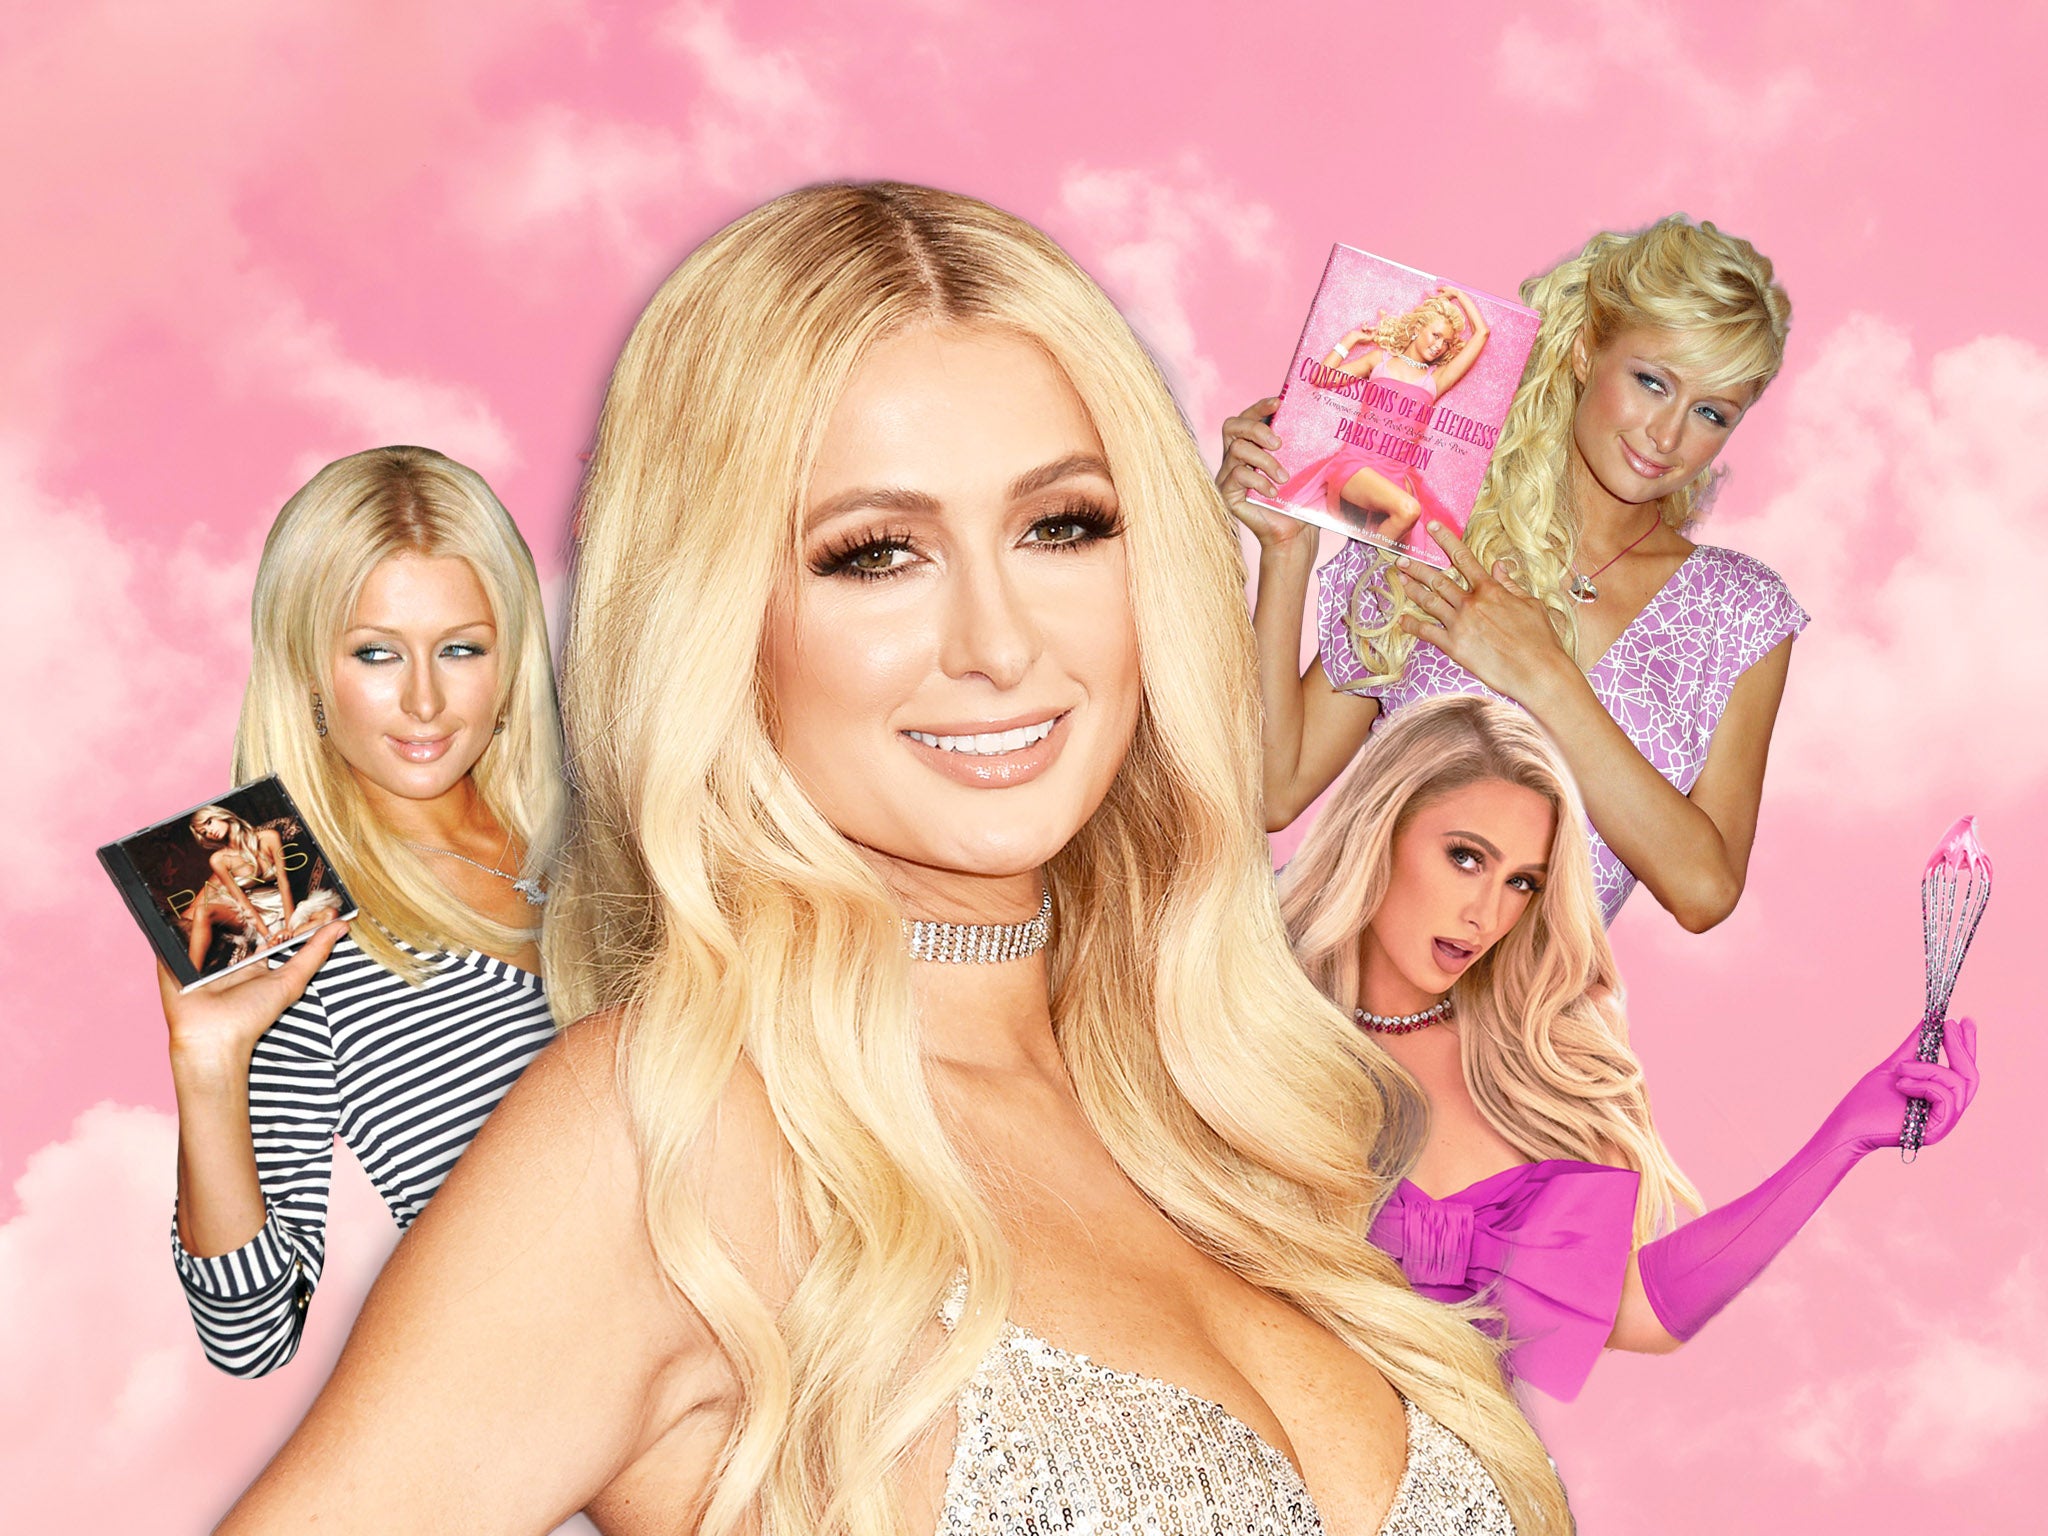 Paris Hilton has spent 20 years playing Paris Hilton, and were still captivated The Independent pic